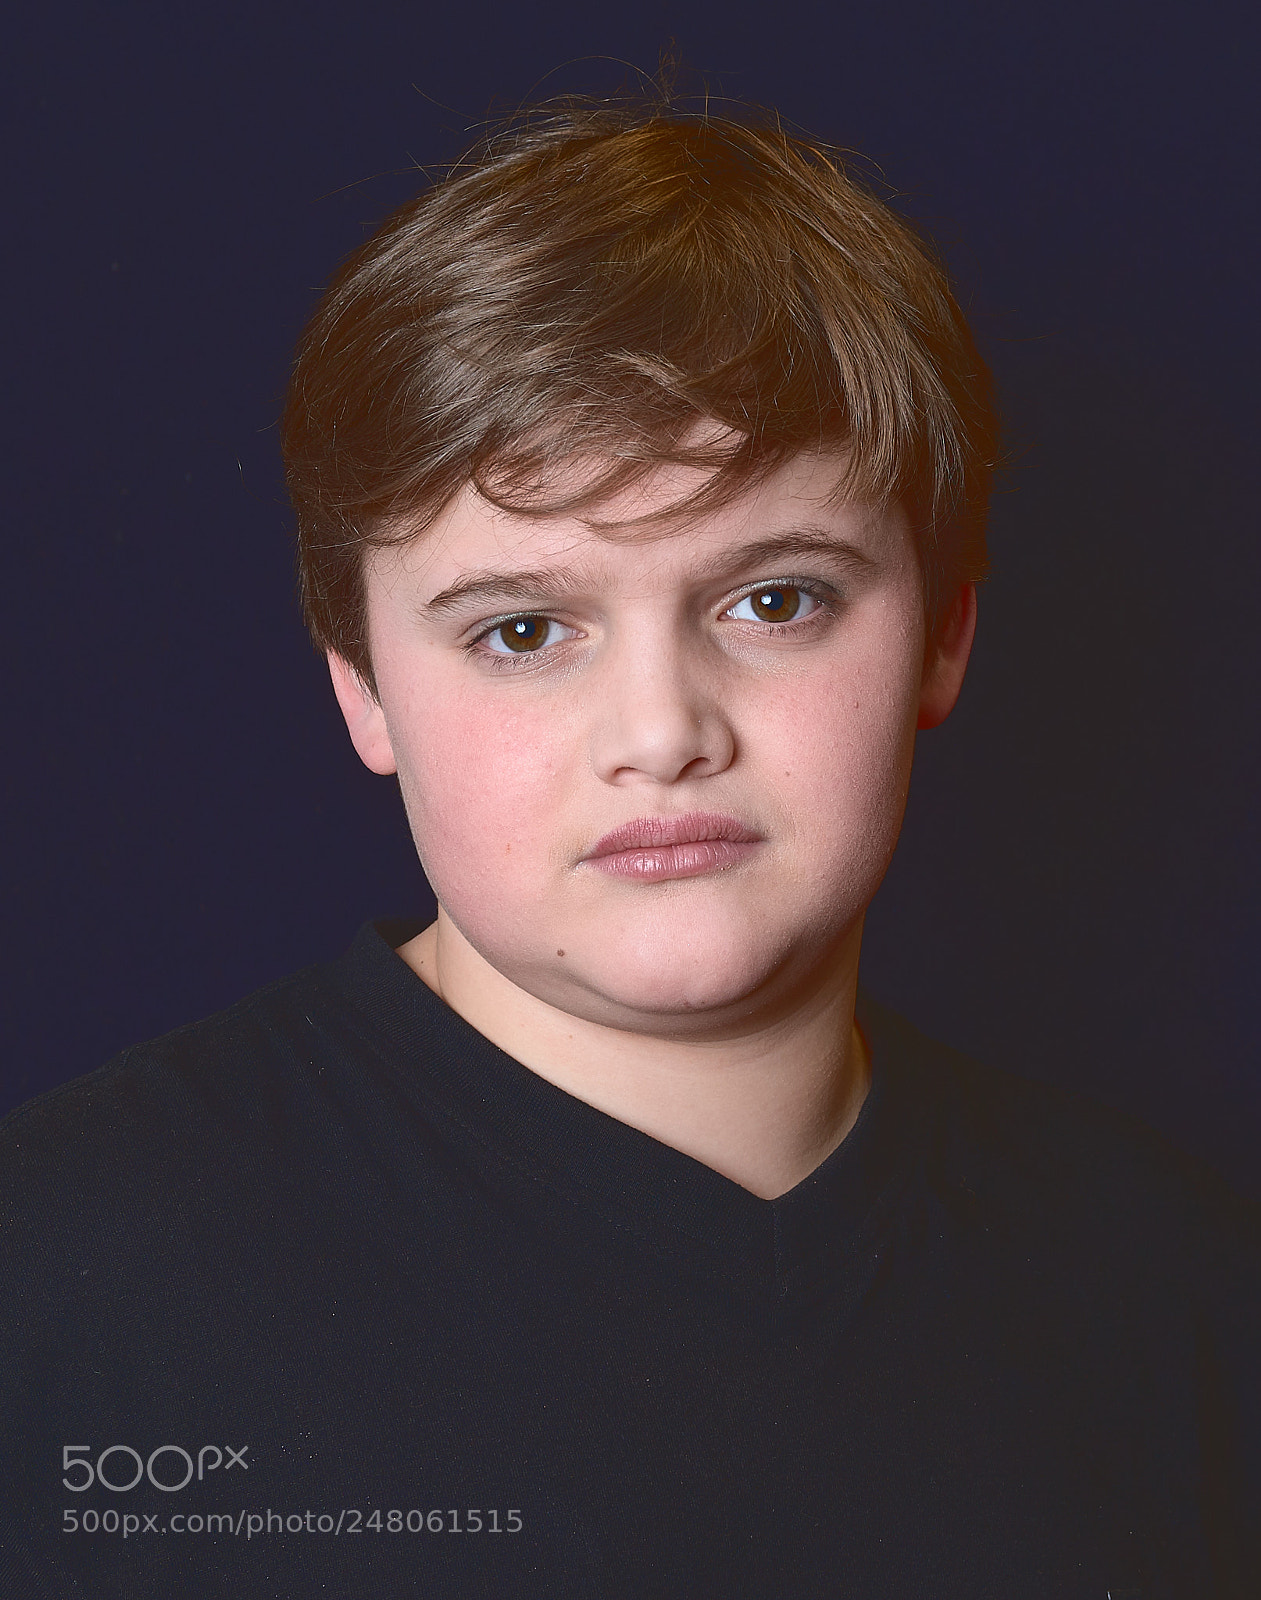 Sony a99 II sample photo. A young actor photography